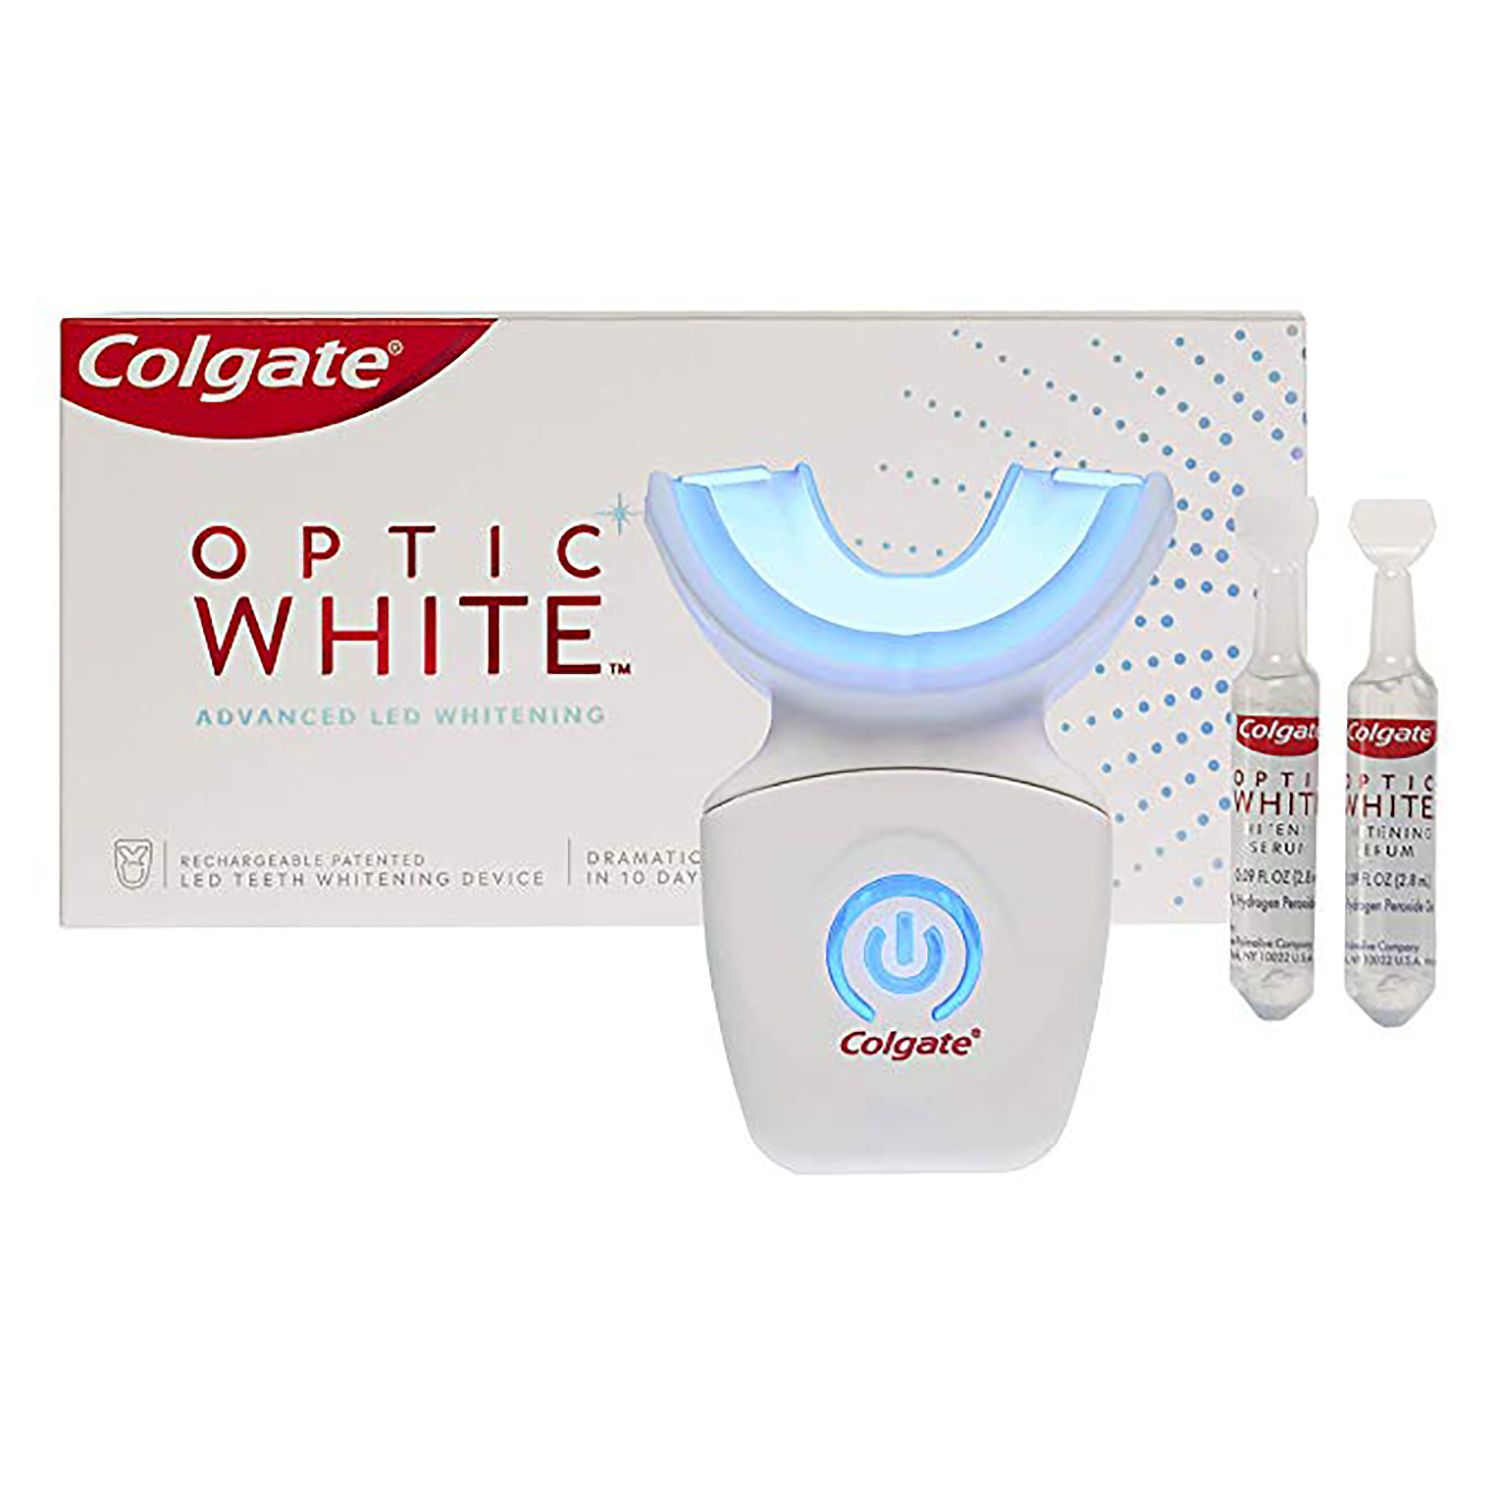 The Best Teeth Whitening Kit for a Brighter, Whiter Smile ...